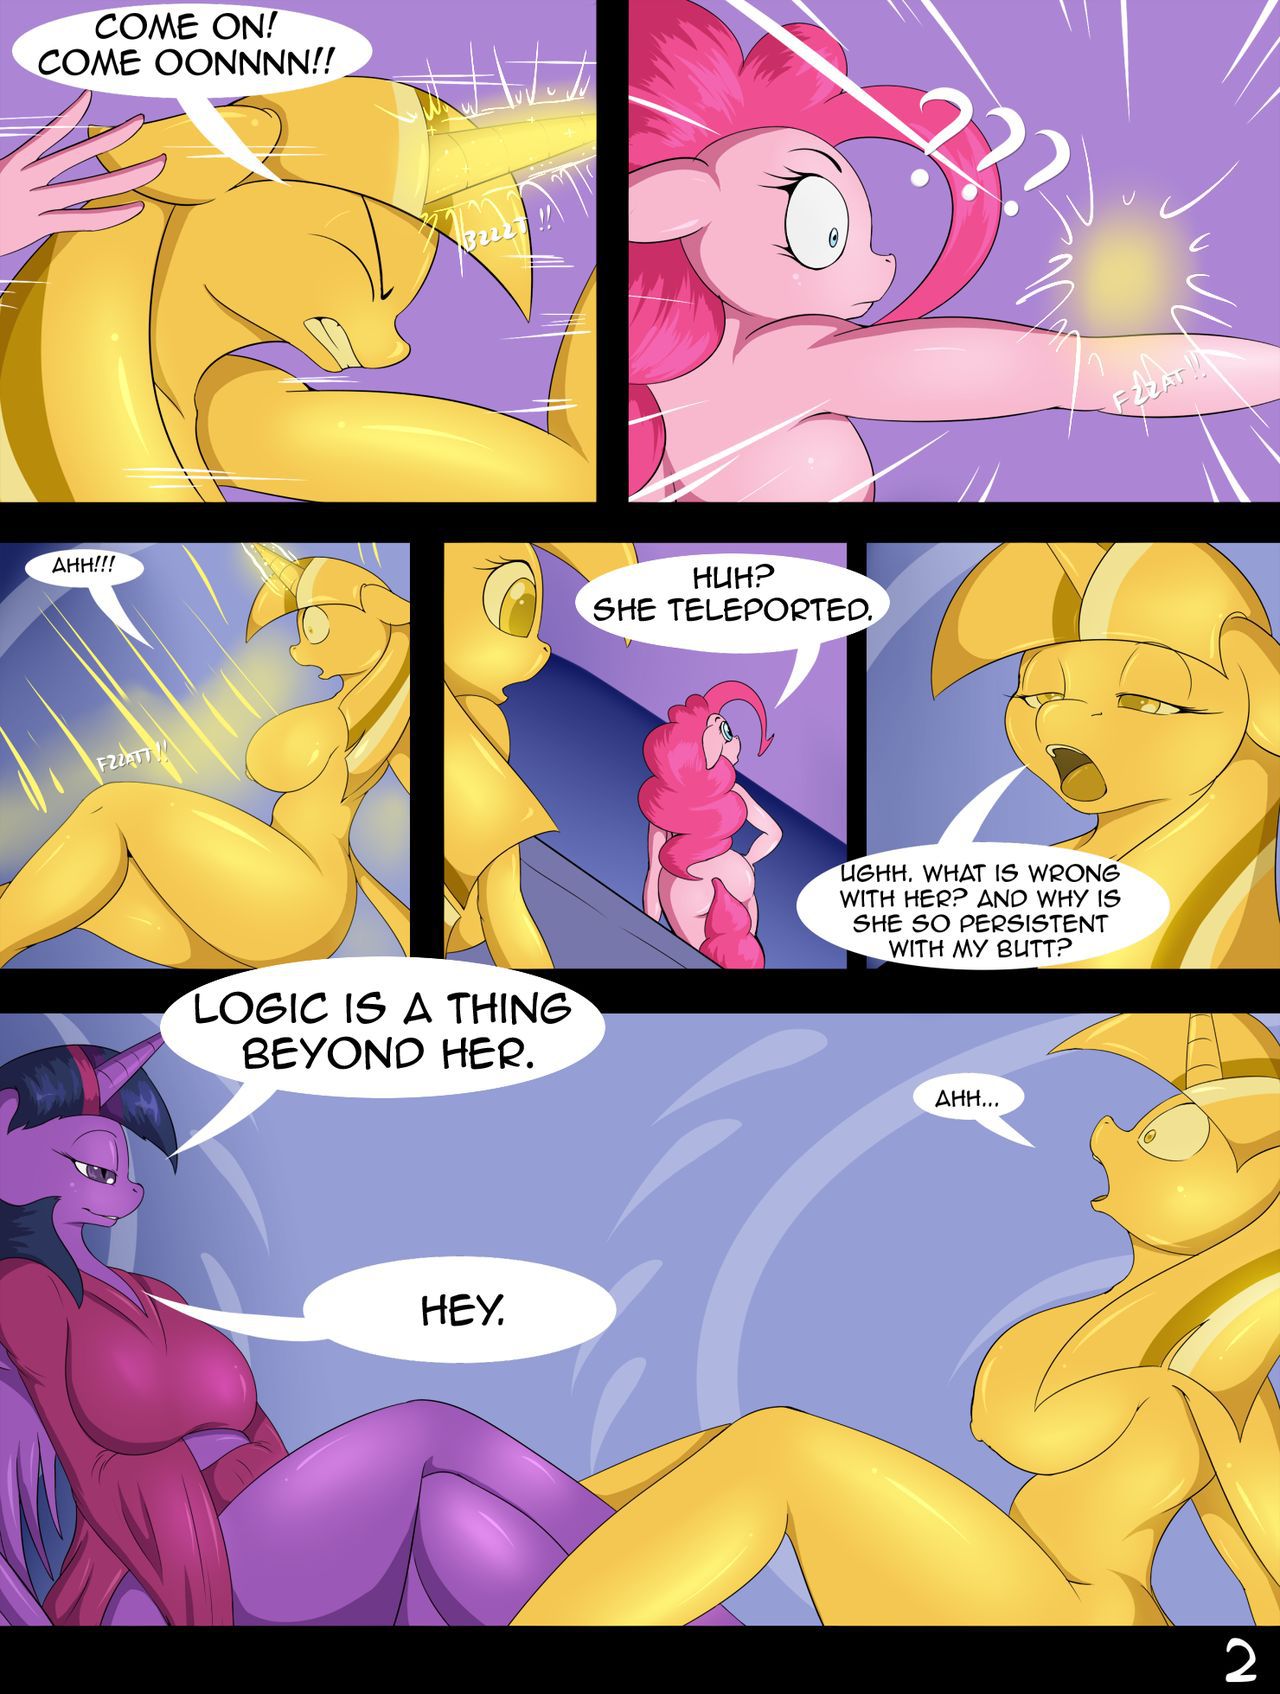 Temptation Tales (Part 3) - The Desire by Suirano 3